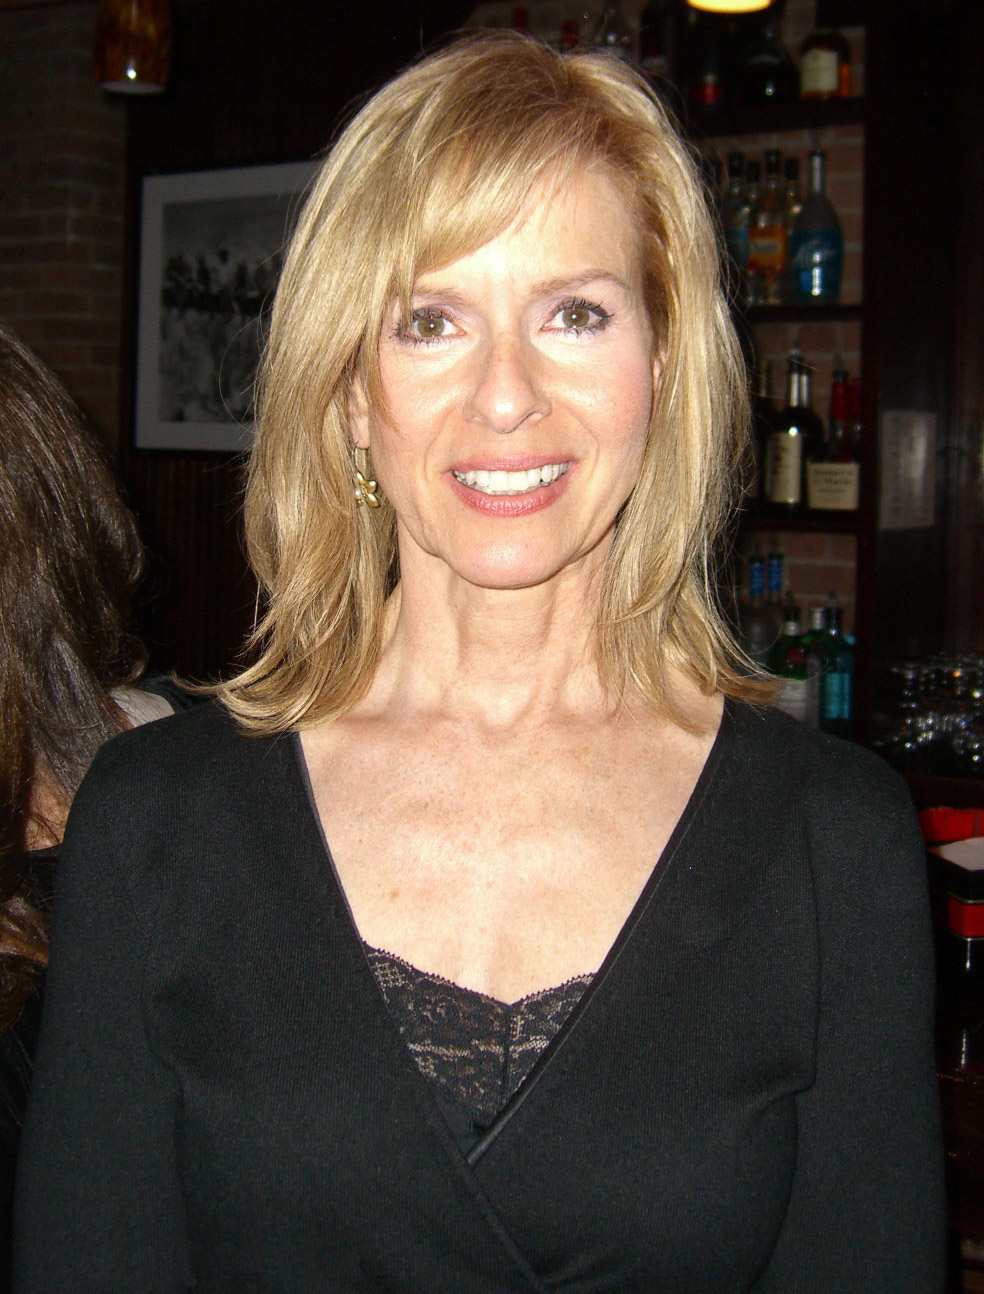 Johnson at the Great American God-Out in [[Manhattan]], November 15, 2007